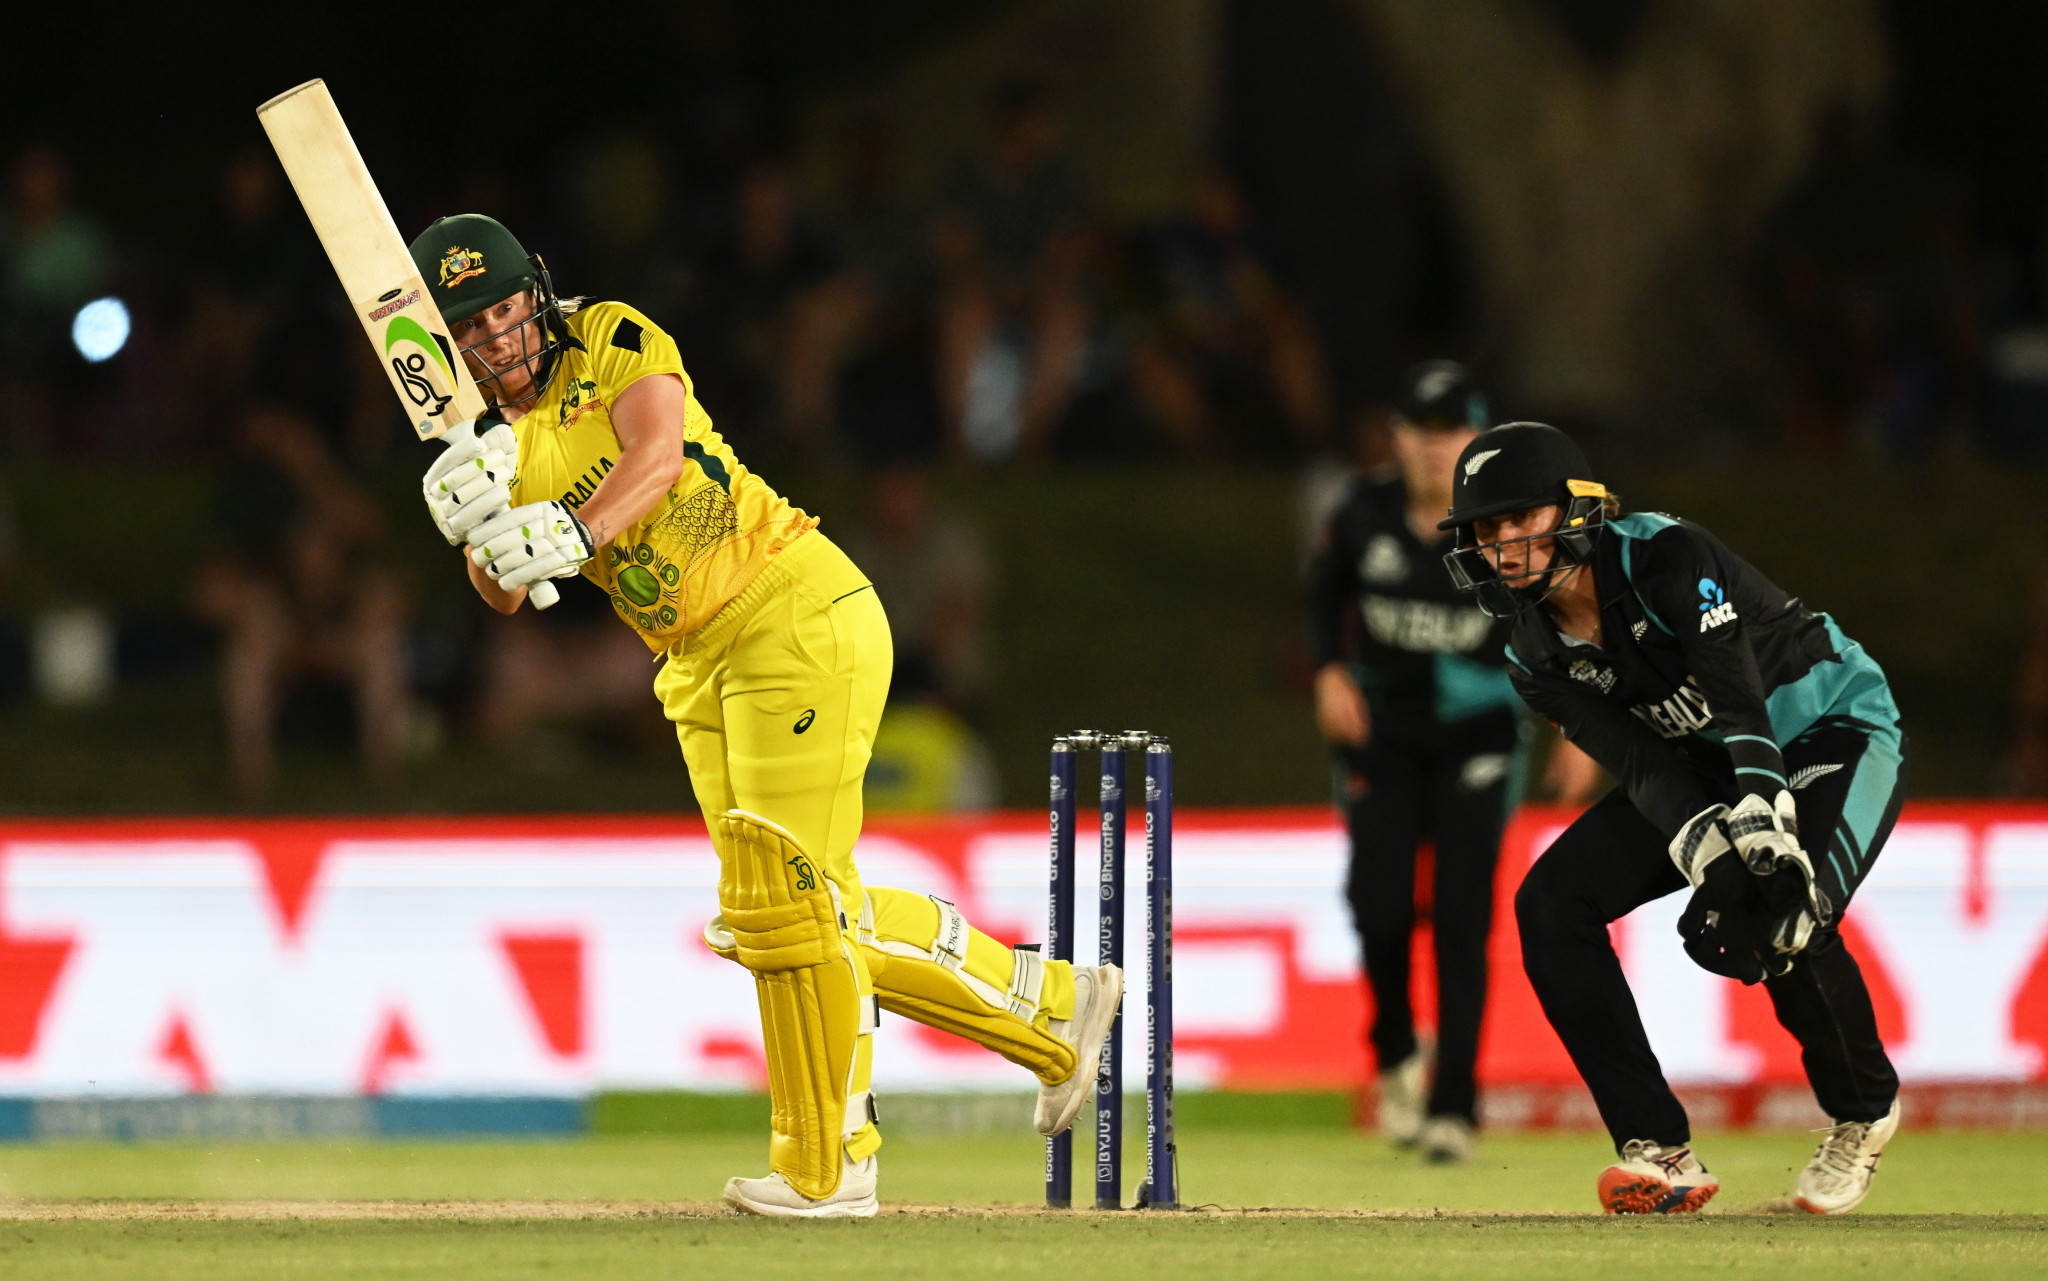 Holders Australia and England claim big wins on day two of Women’s T20 World Cup